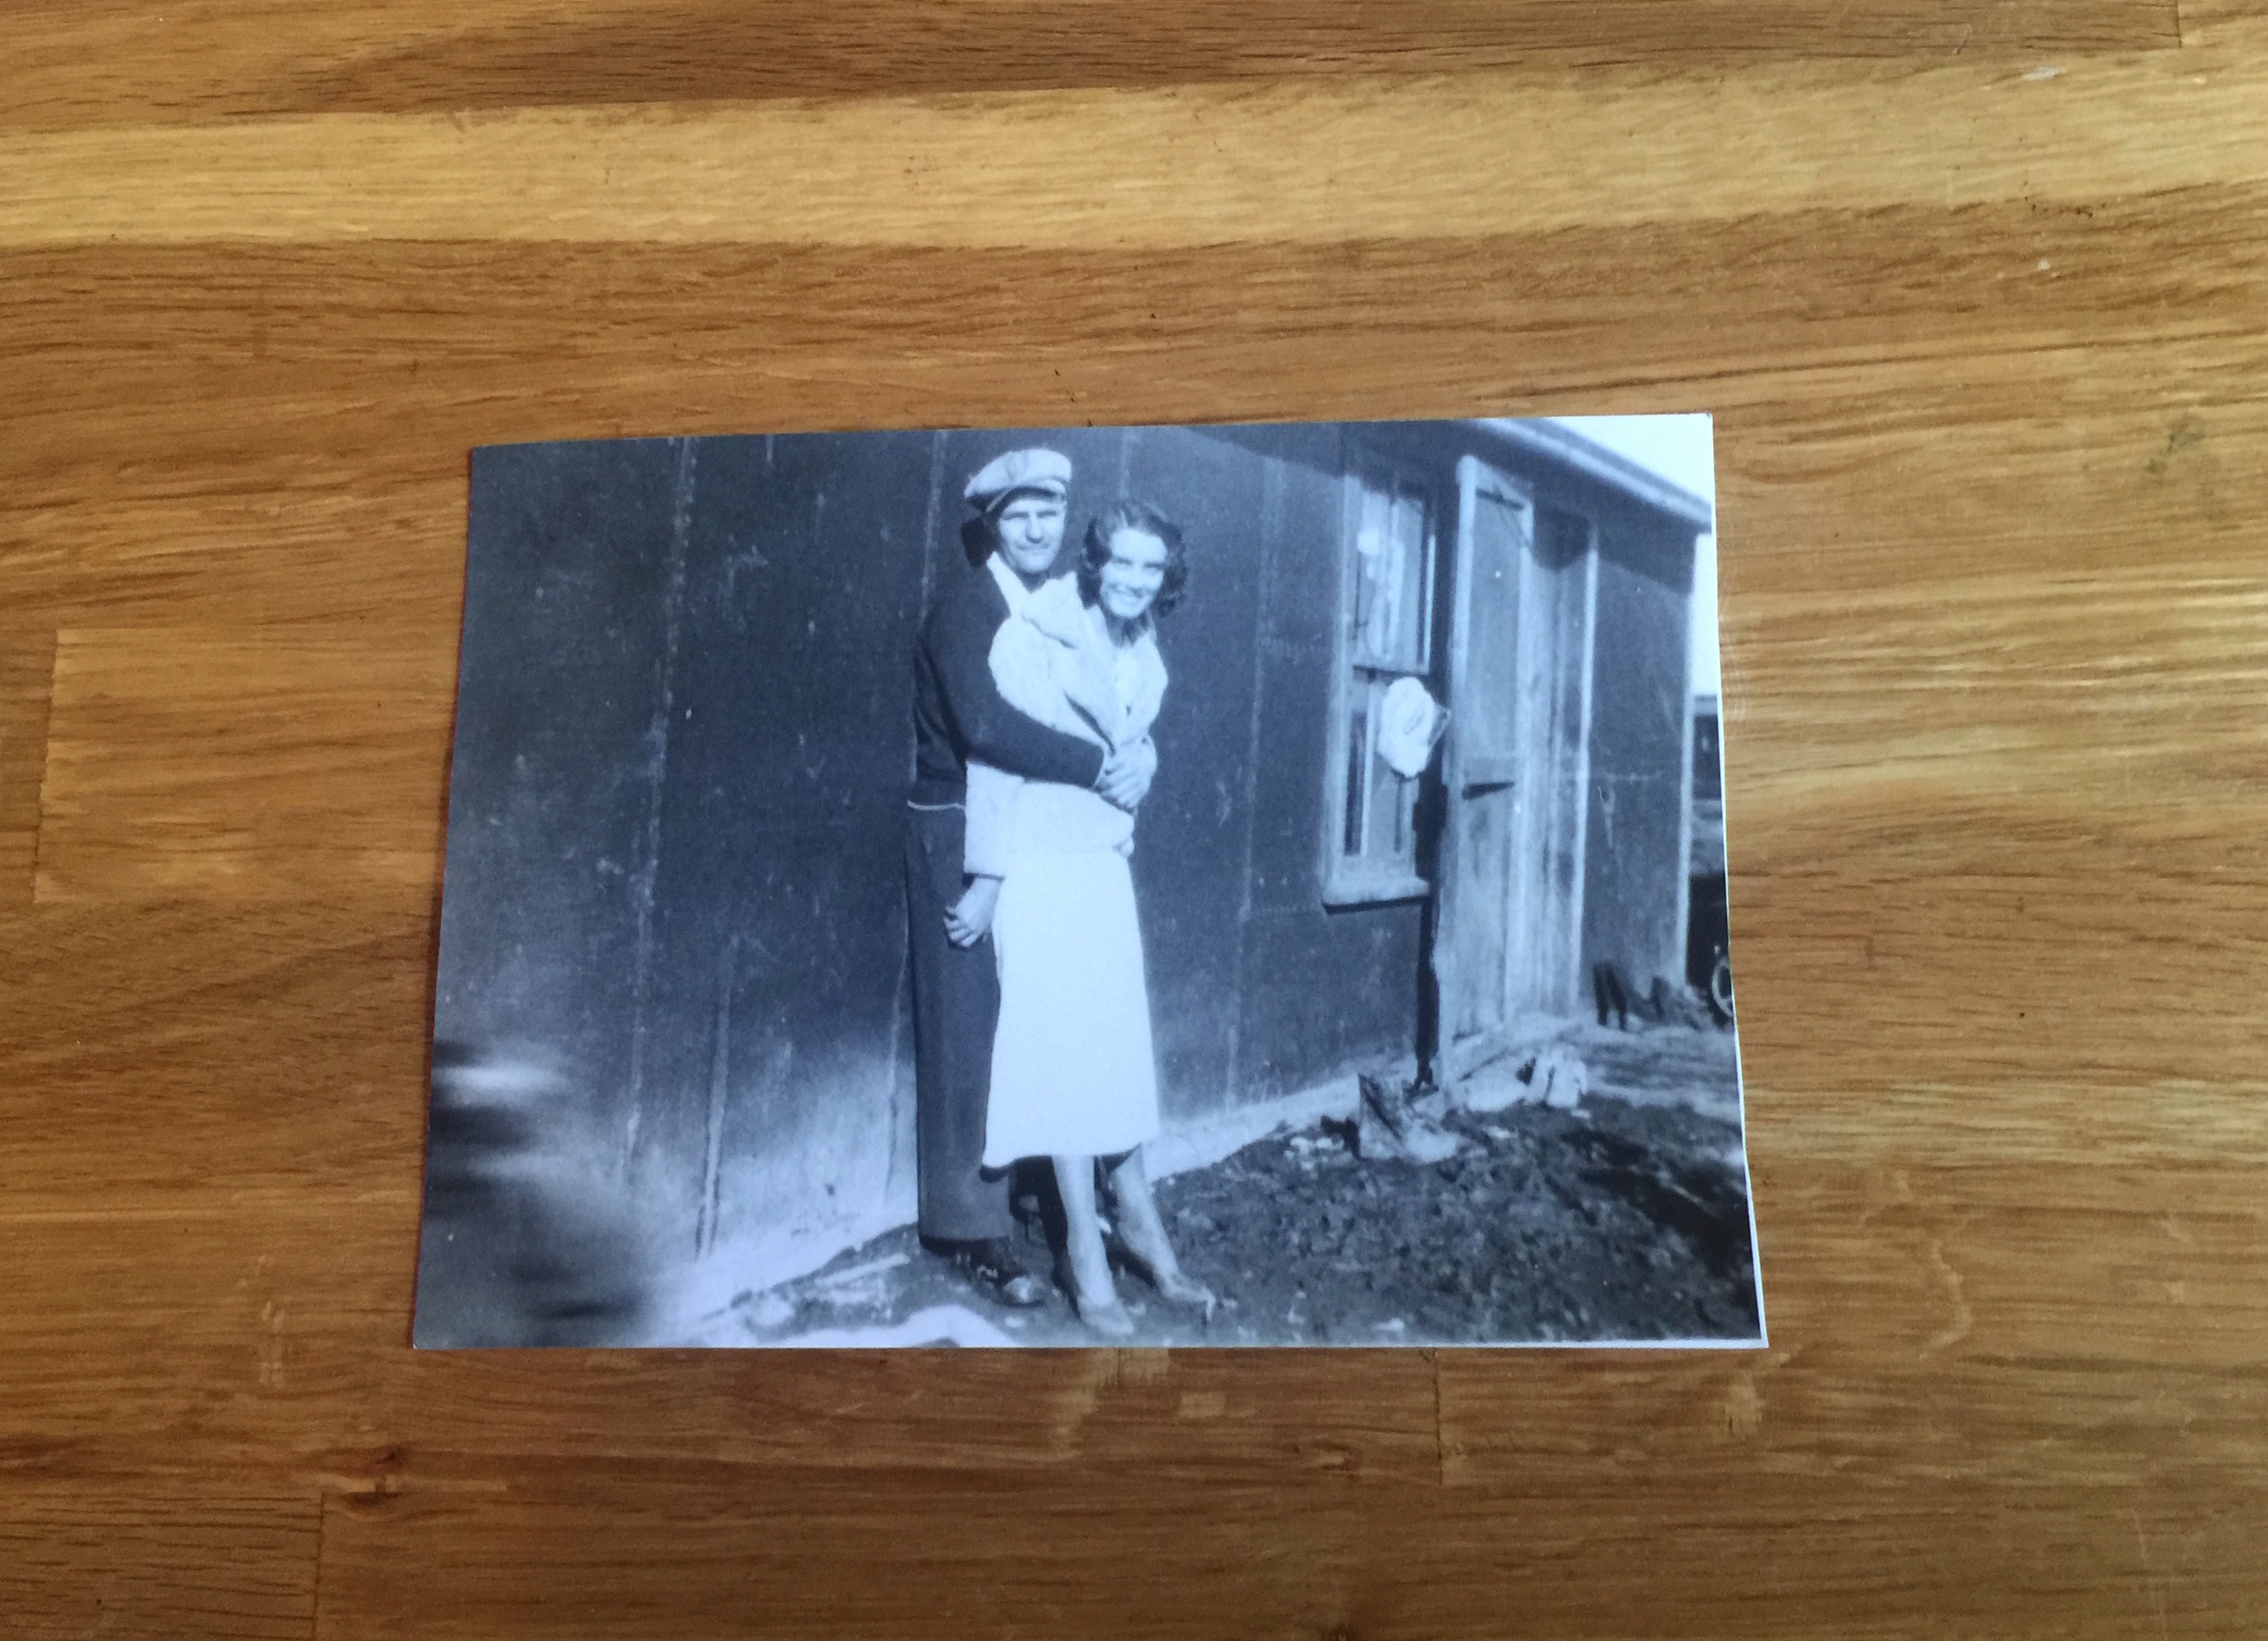  Young and poor, Zelma and Joe donned their fanciest outfits for their 1930s wedding in South Dakota.    memory prompt : When were you particularly resourceful, responding to difficult circumstances with aplomb?&nbsp;  